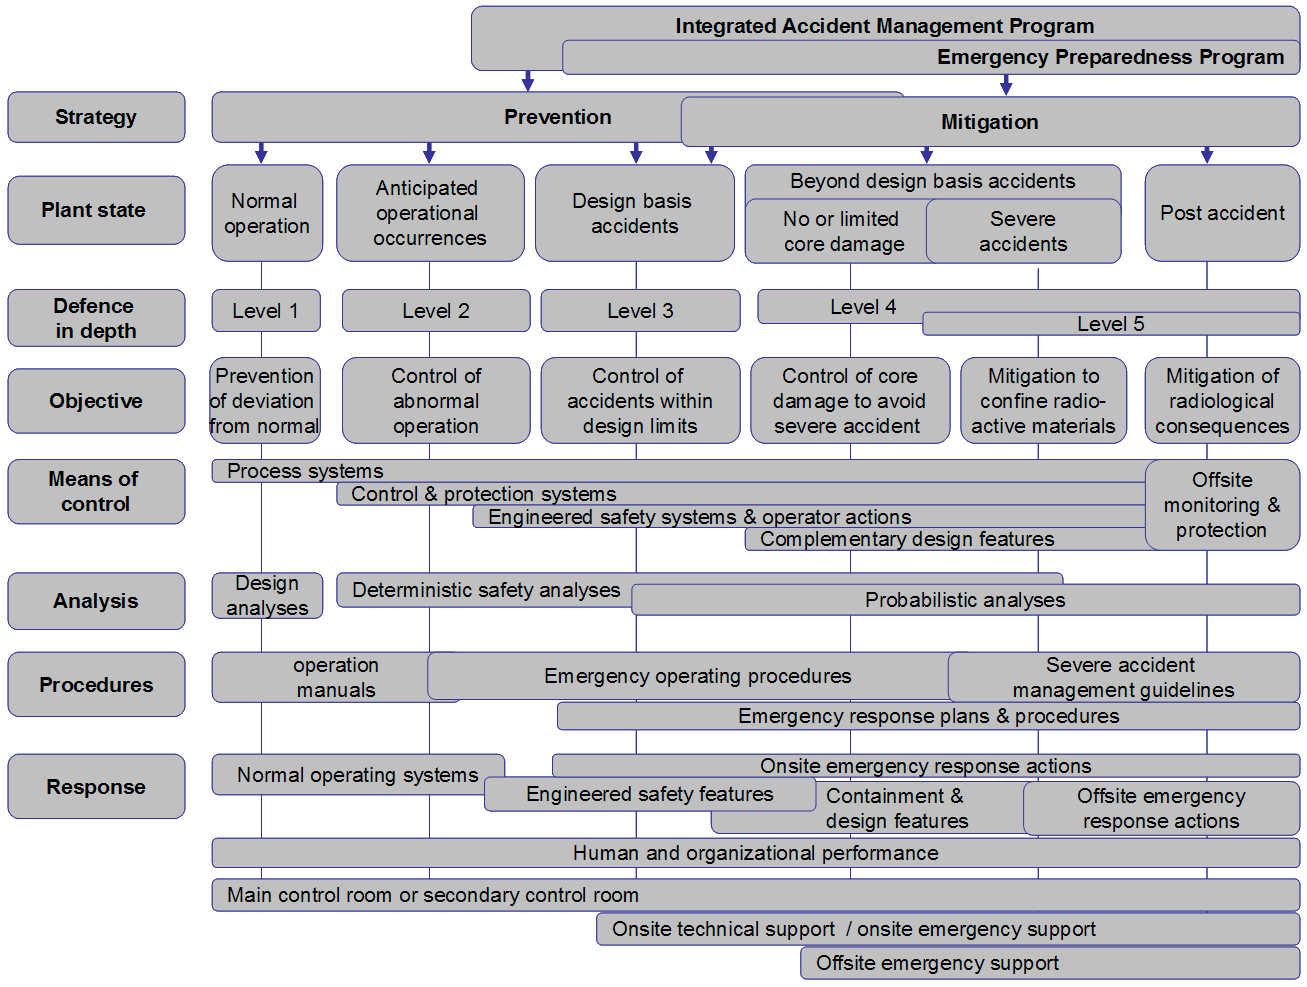 This diagram consists of a grid that is roughly aligned by plant state. For each Plant State, the Objective, Strategy, Level of Defence in Depth, Objective, Means of Control, Analysis, Procedures and Response options are listed.